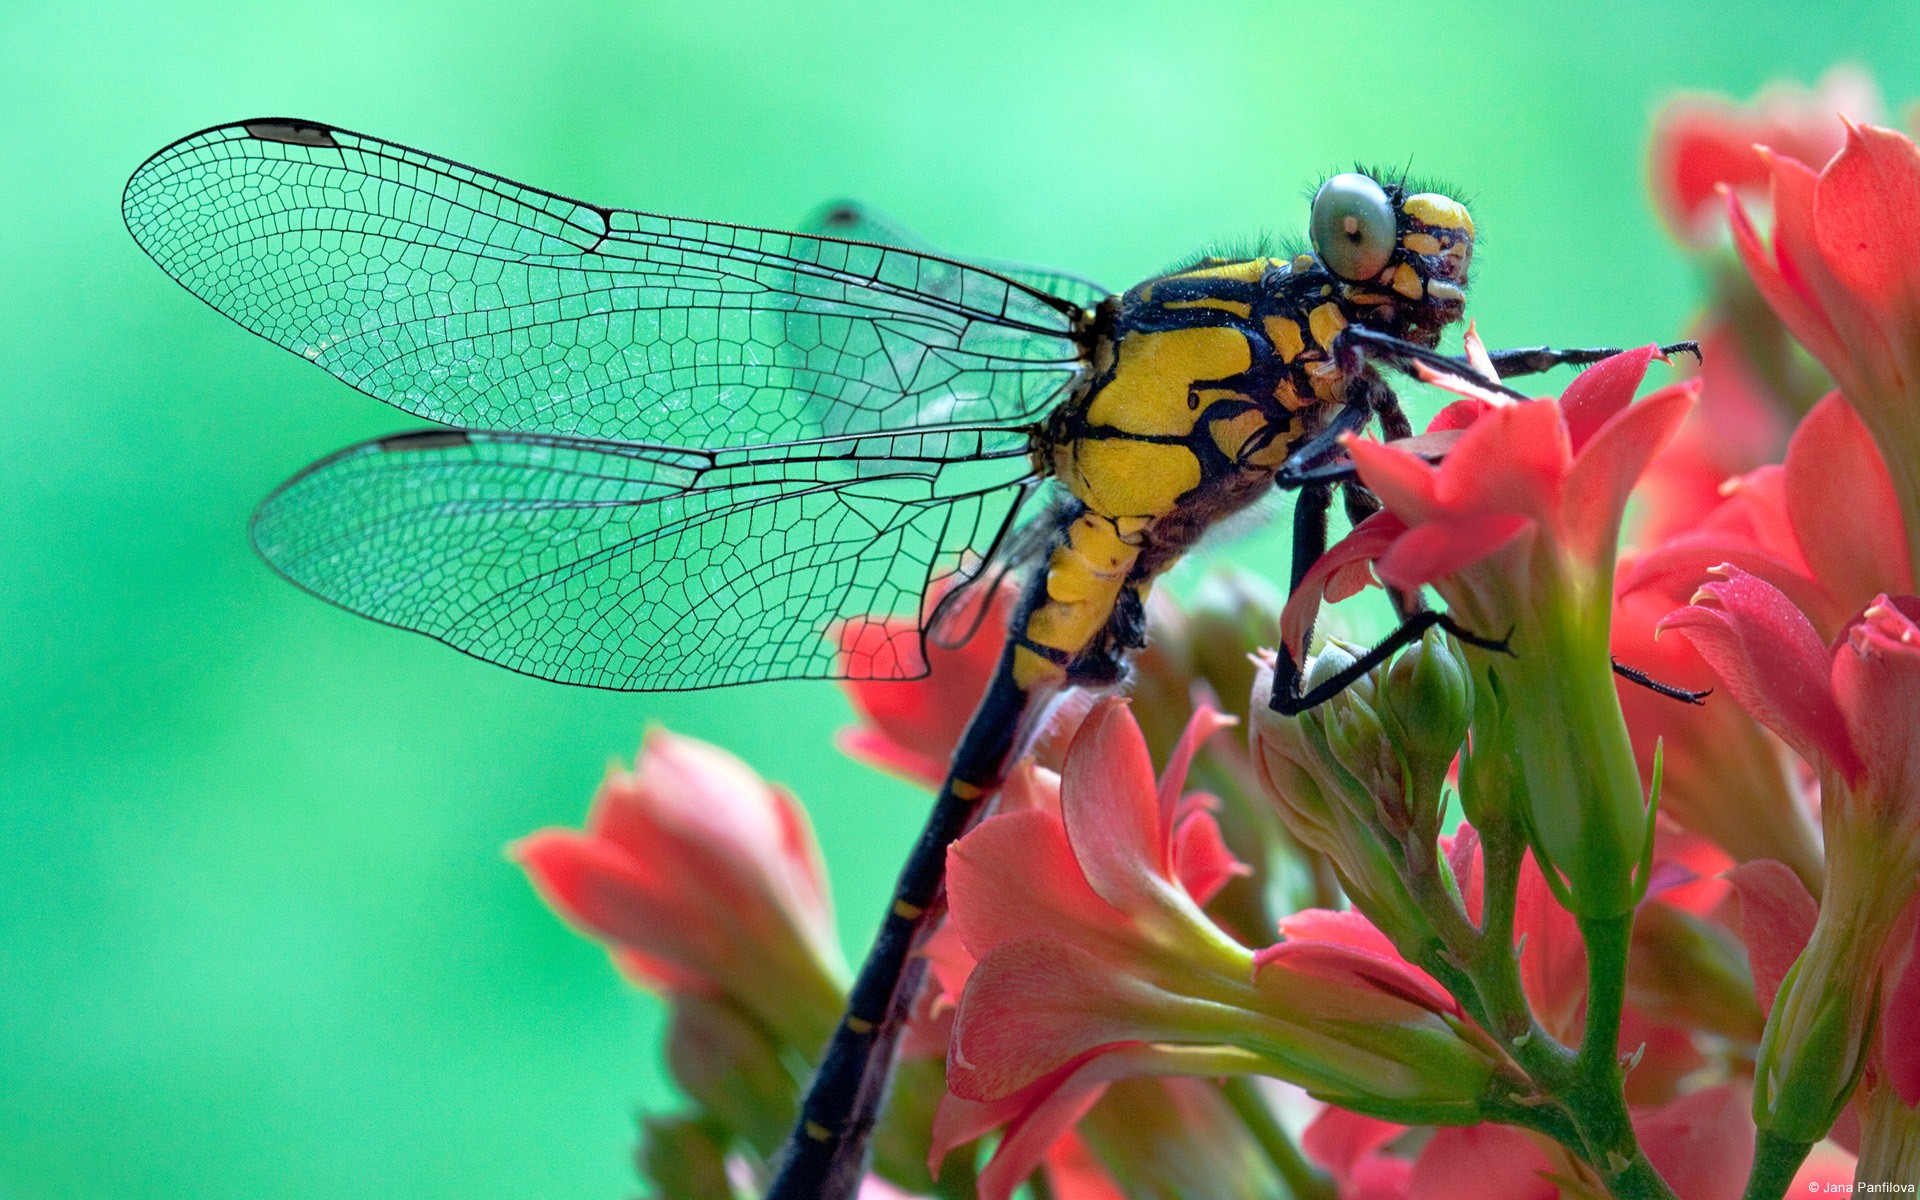 General 1920x1200 nature animals dragonflies insect green macro red flowers closeup plants simple background vibrant